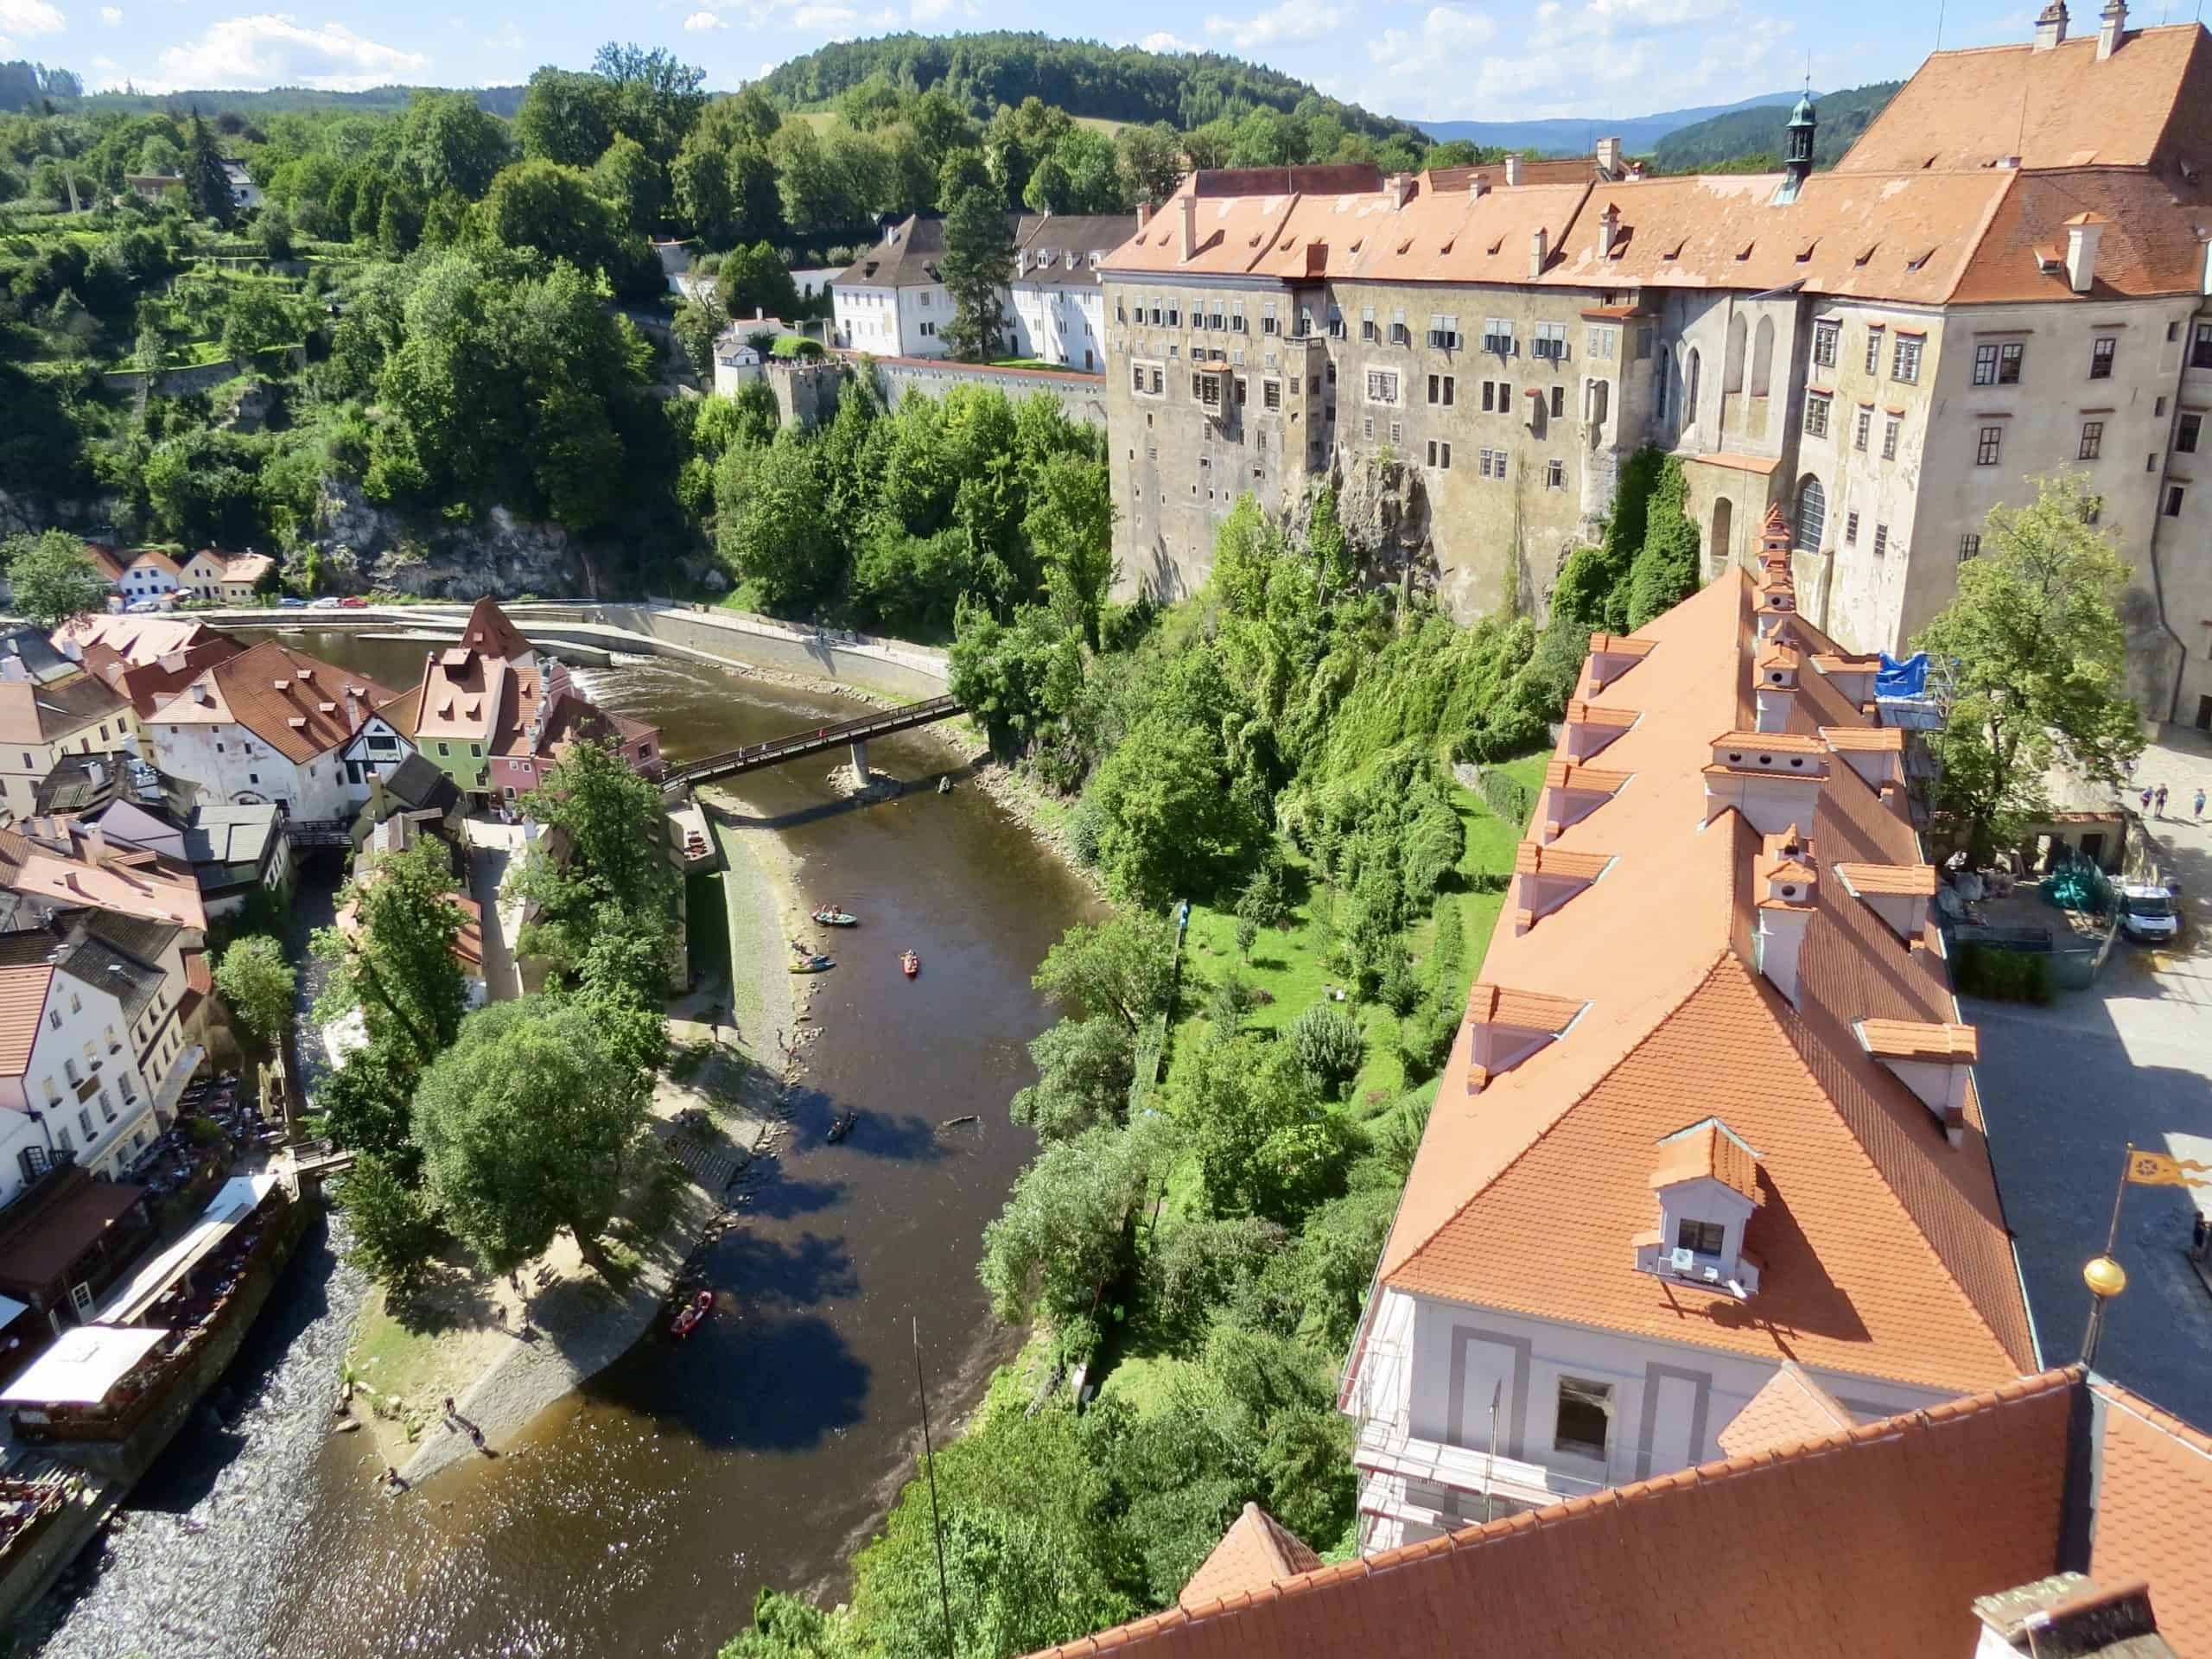 There are many free things to do in Český Krumlov